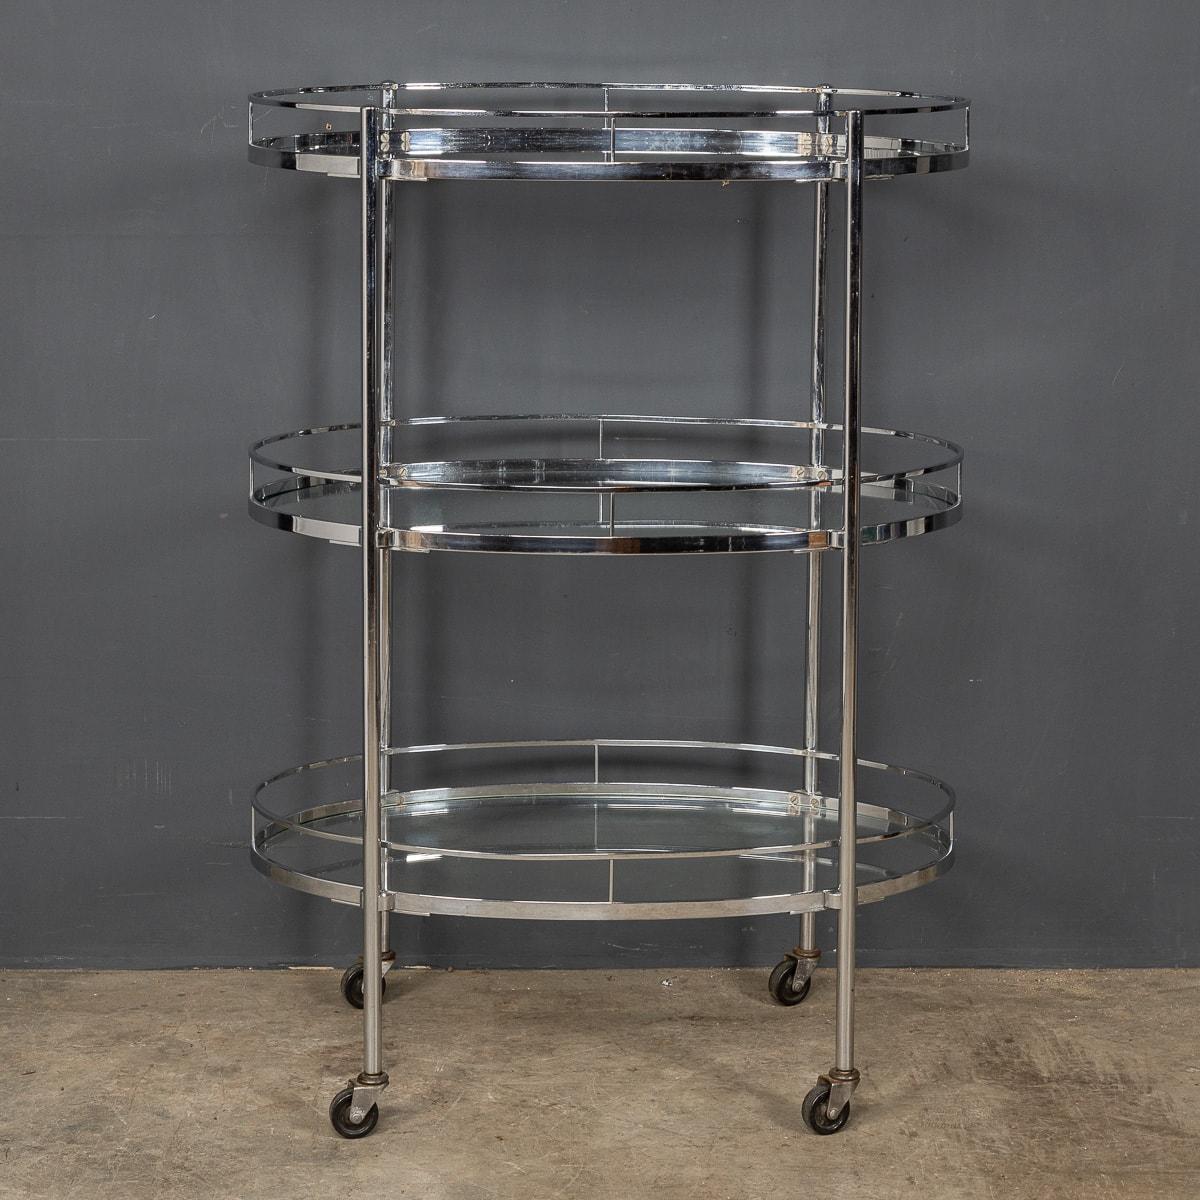 A Classic 1950s Italian chrome cart with three tiers of glass trays on smooth rolling castors. c.1950-1959.

CONDITION
In Good Condition - some wear consistent with age.

Size
Height: 108cm
Width: 77cm
Depth: 47cm.